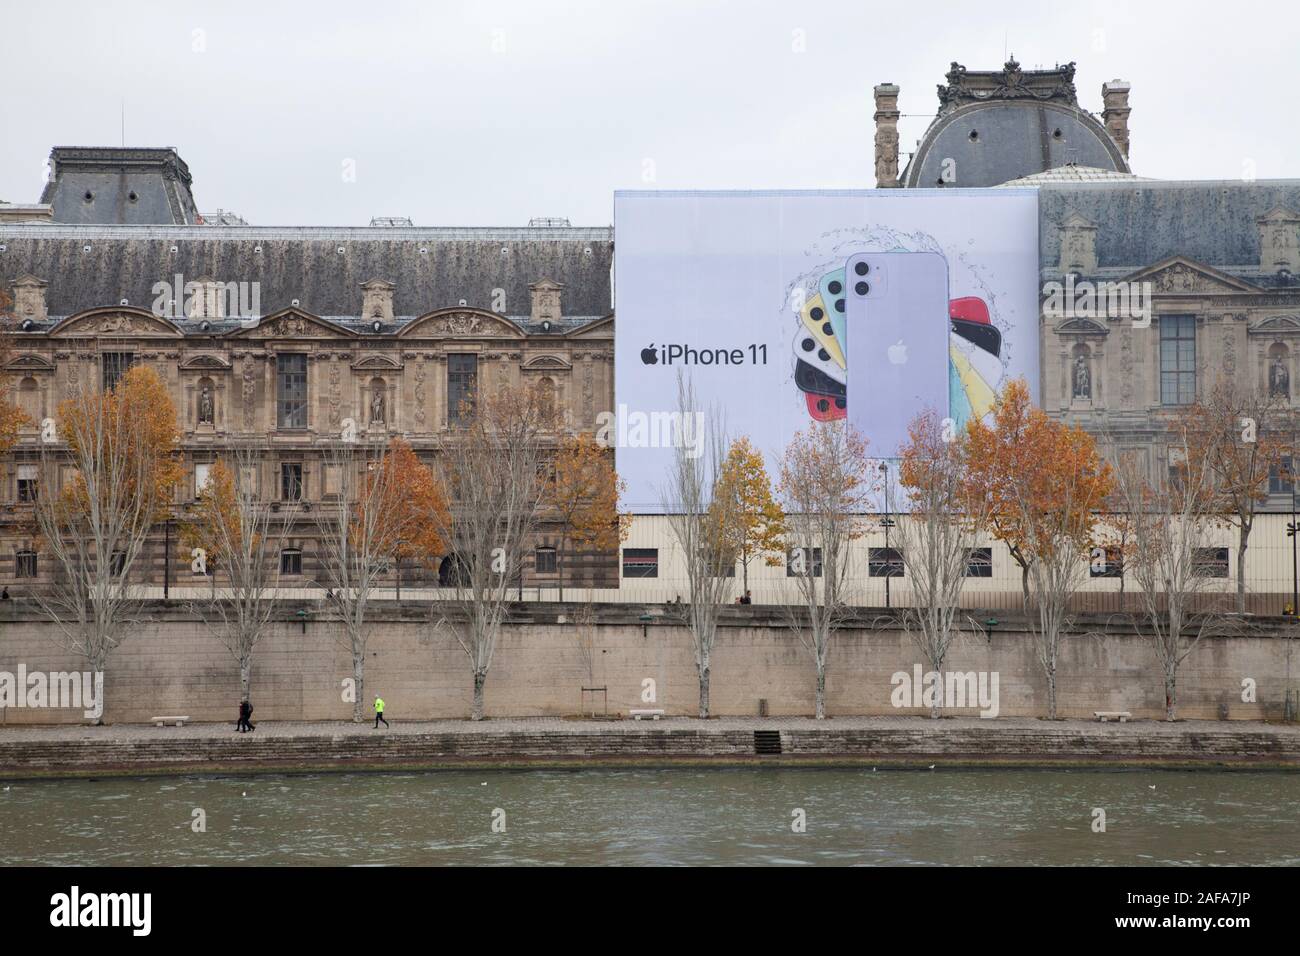 A huge advert for Apple's iPhone 11 on the Louvre art gallery on the banks of the River Seine in Paris Stock Photo